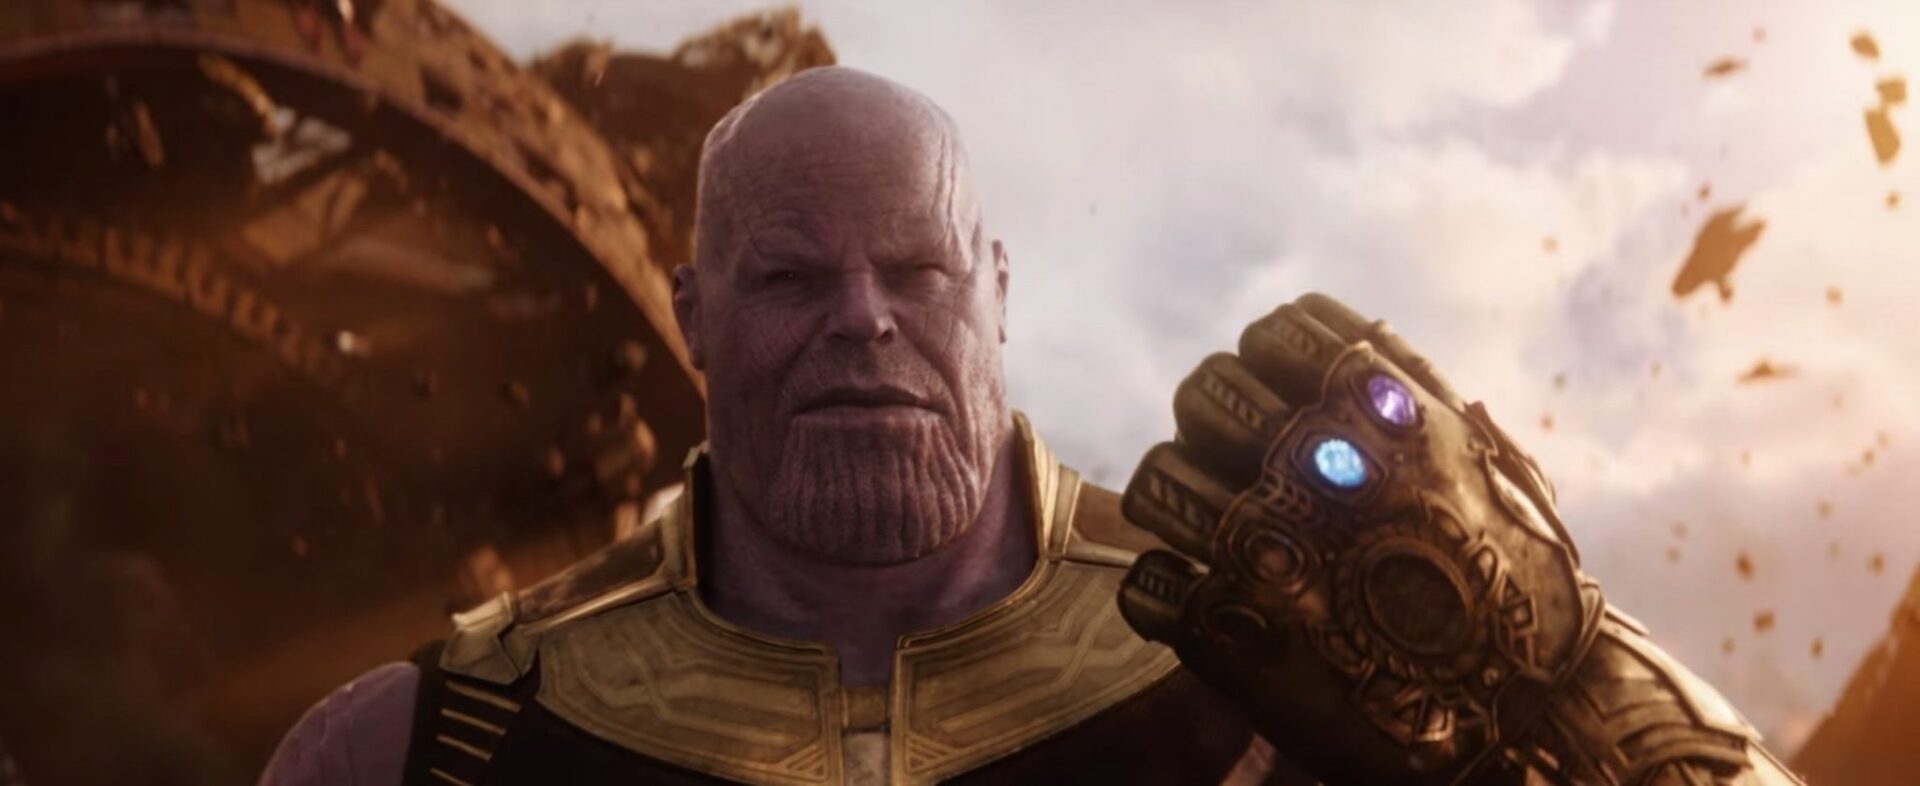 The end of an era approaches with release of ‘Avengers: Infinity War’ trailer